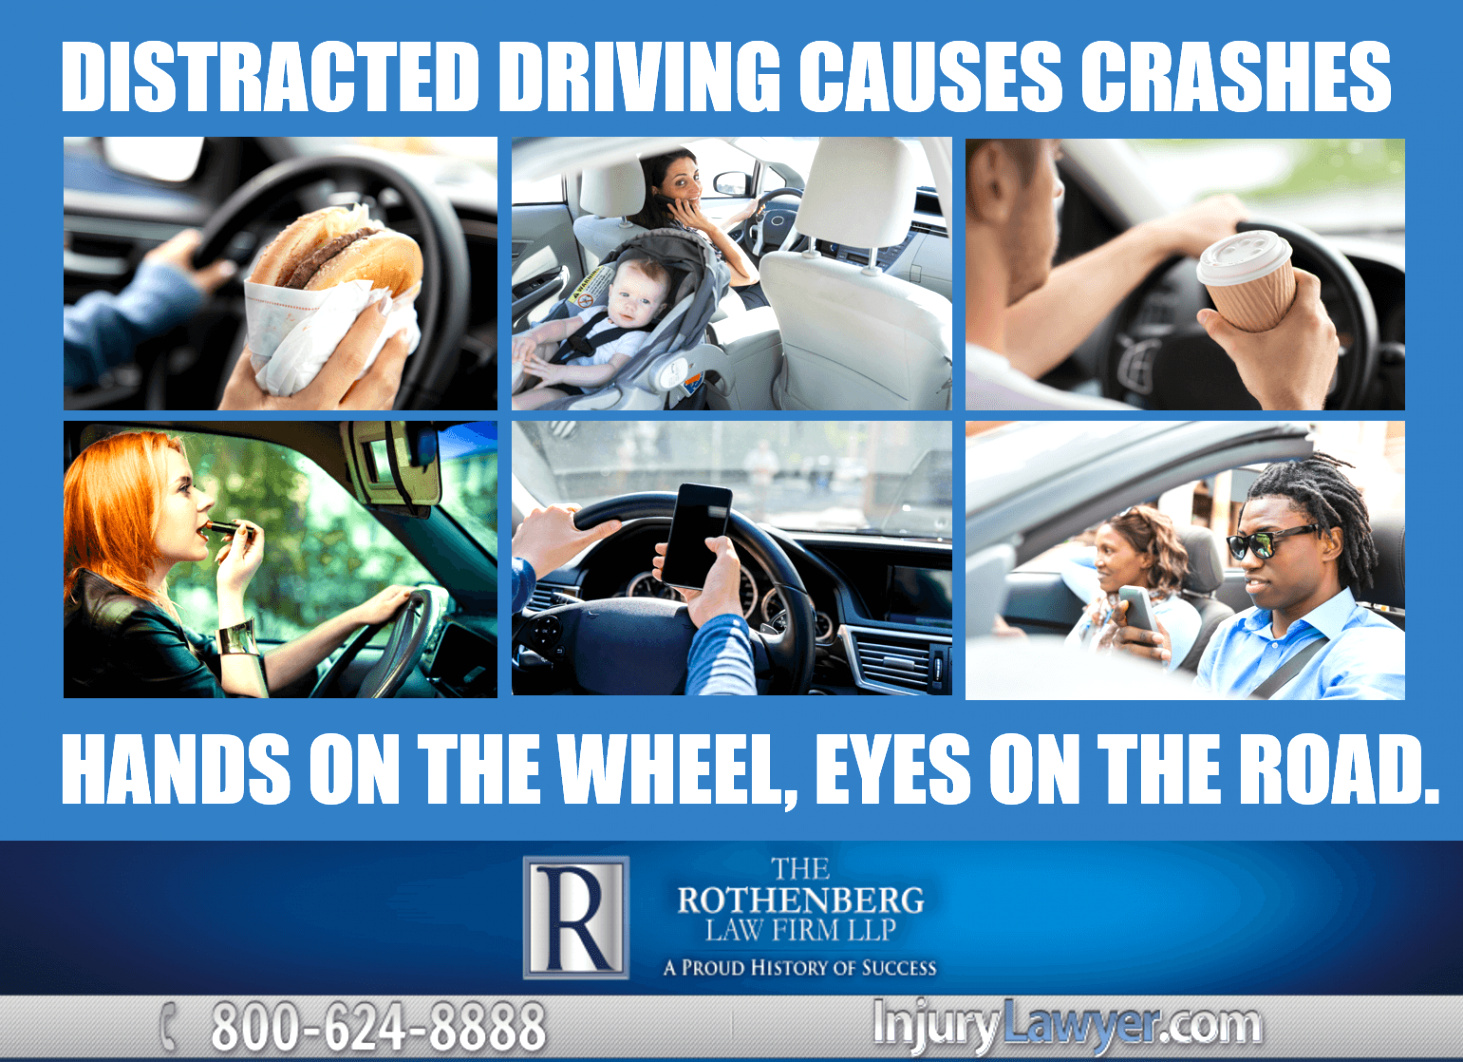 Auto Accident Lawyer Pennsylvania Dans Distracted Driving Meme the Rothenberg Law Firm Llp